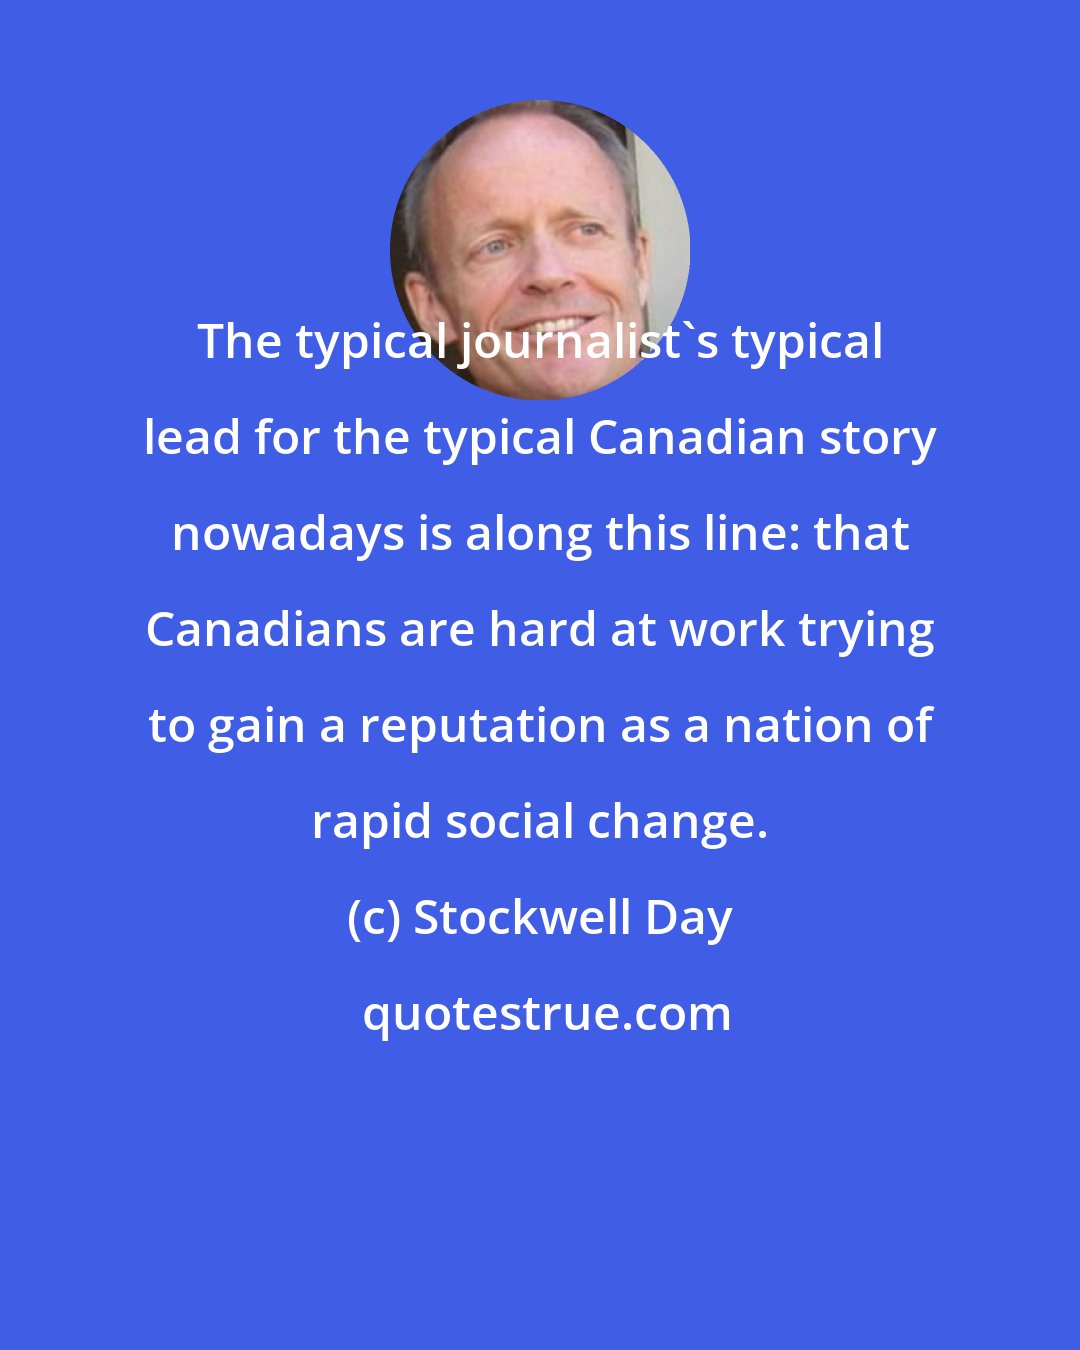 Stockwell Day: The typical journalist's typical lead for the typical Canadian story nowadays is along this line: that Canadians are hard at work trying to gain a reputation as a nation of rapid social change.